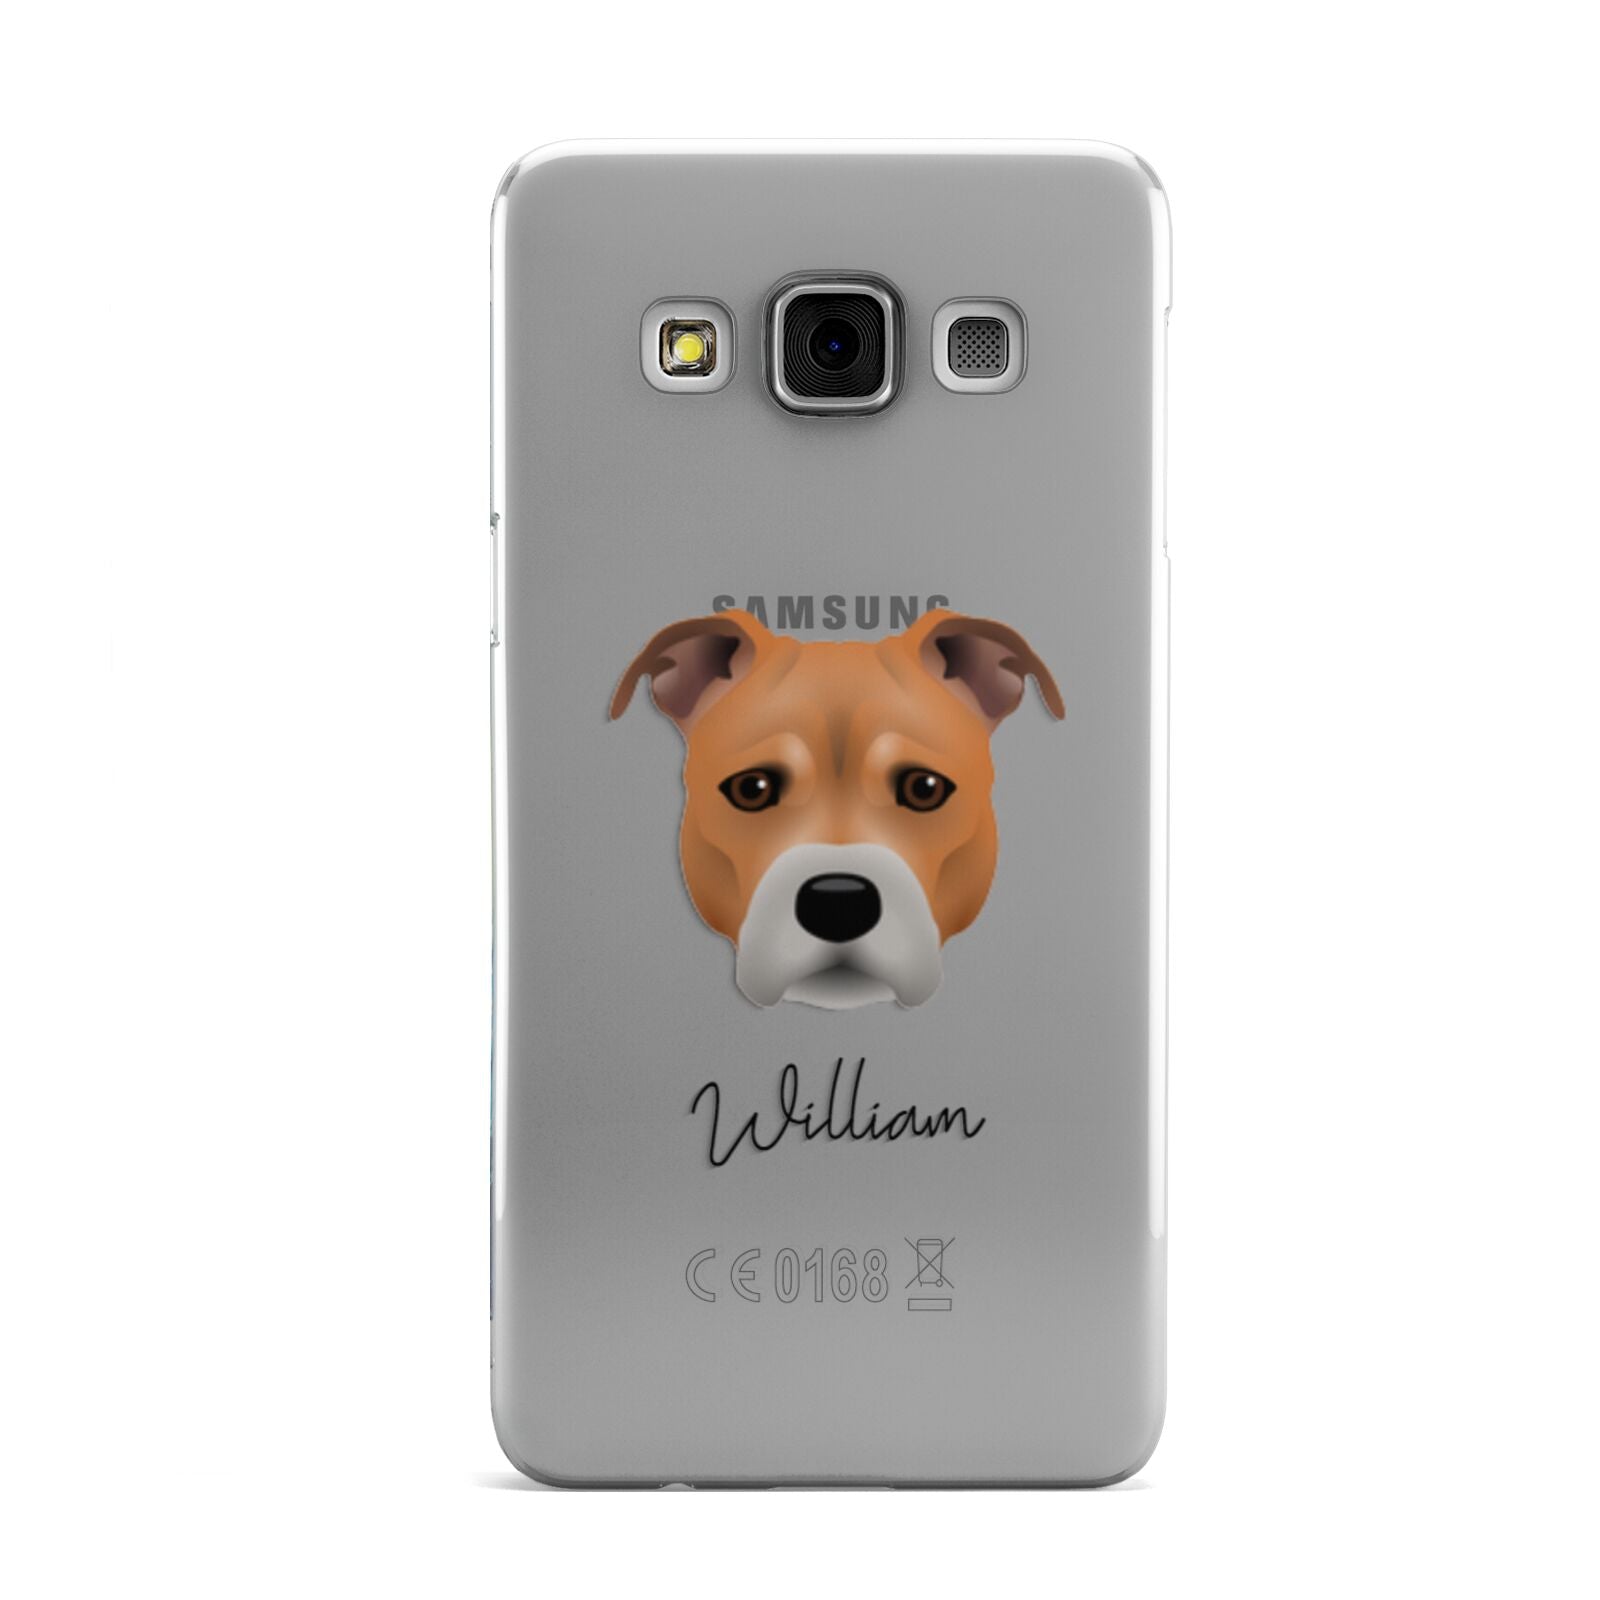 Staffordshire Bull Terrier Personalised Samsung Galaxy A3 Case